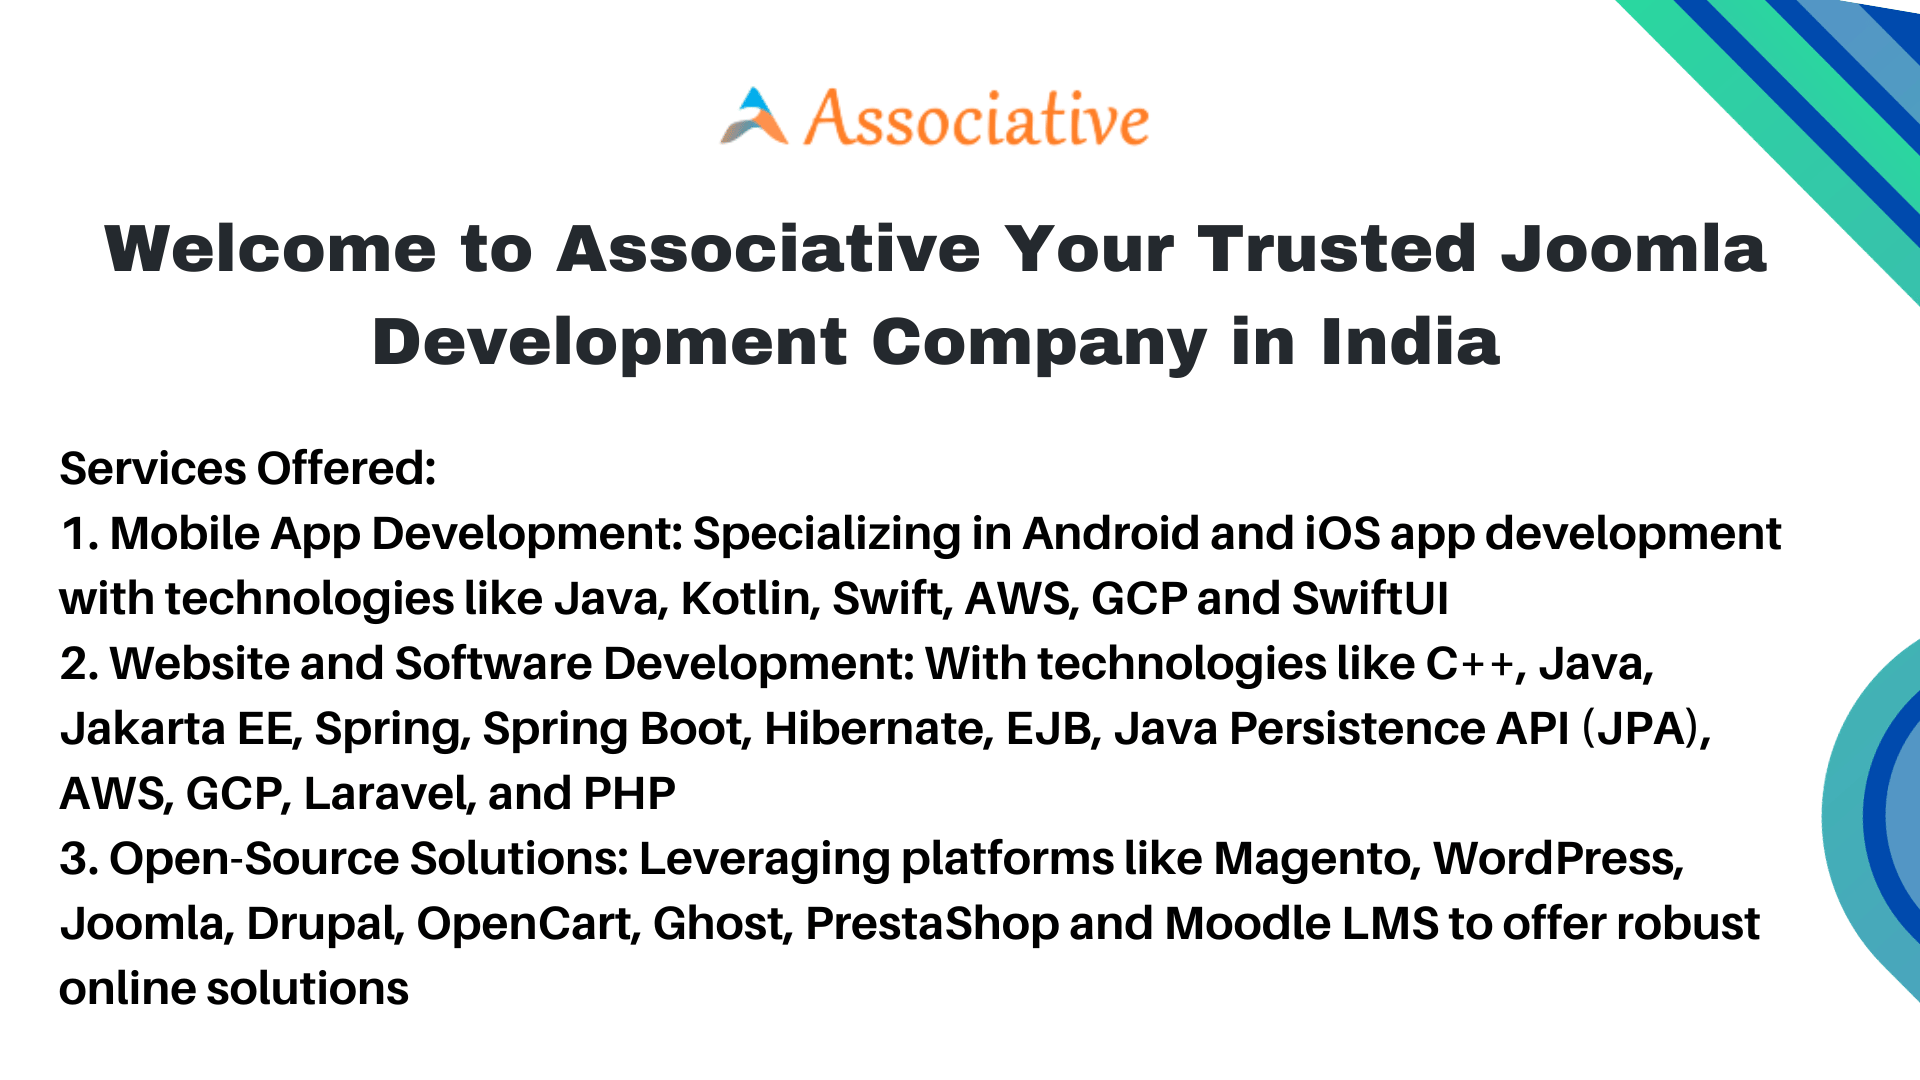 Welcome to Associative Your Trusted Joomla Development Company in India